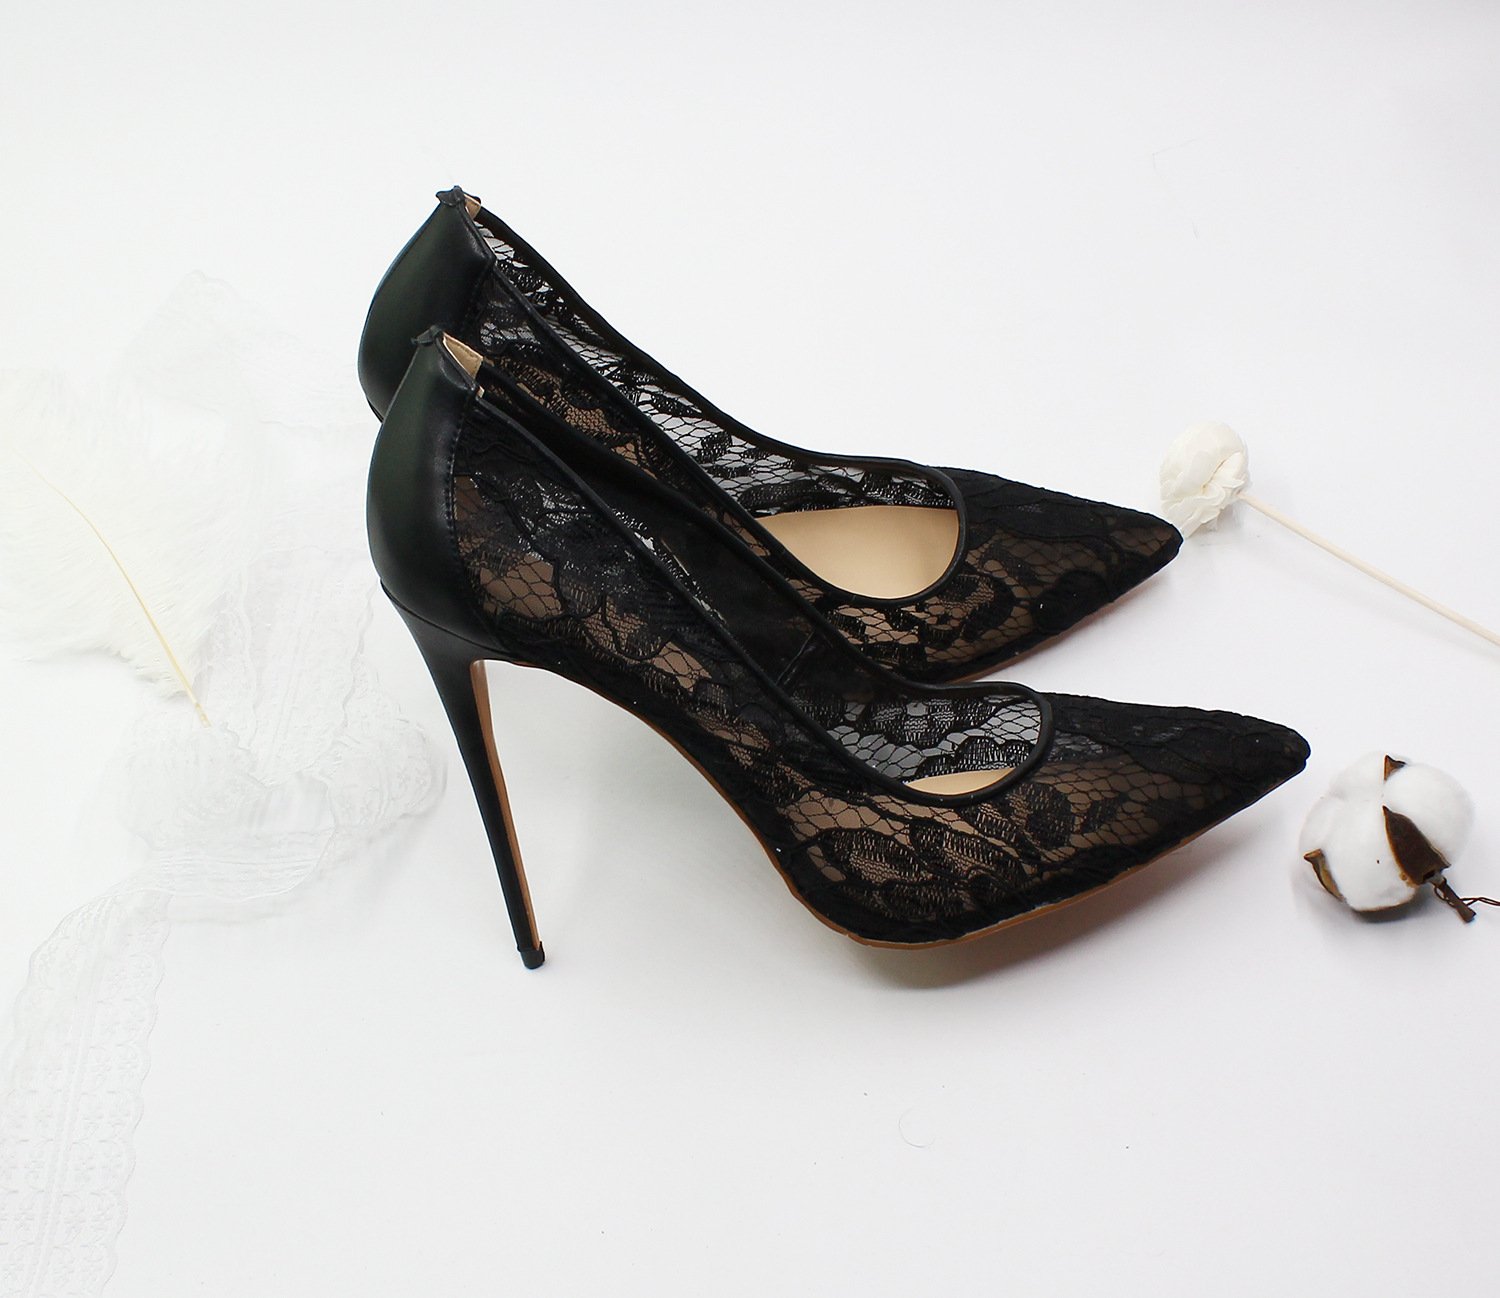 High-heels with lace patterns, Fashion Evening Party Shoes, yy55